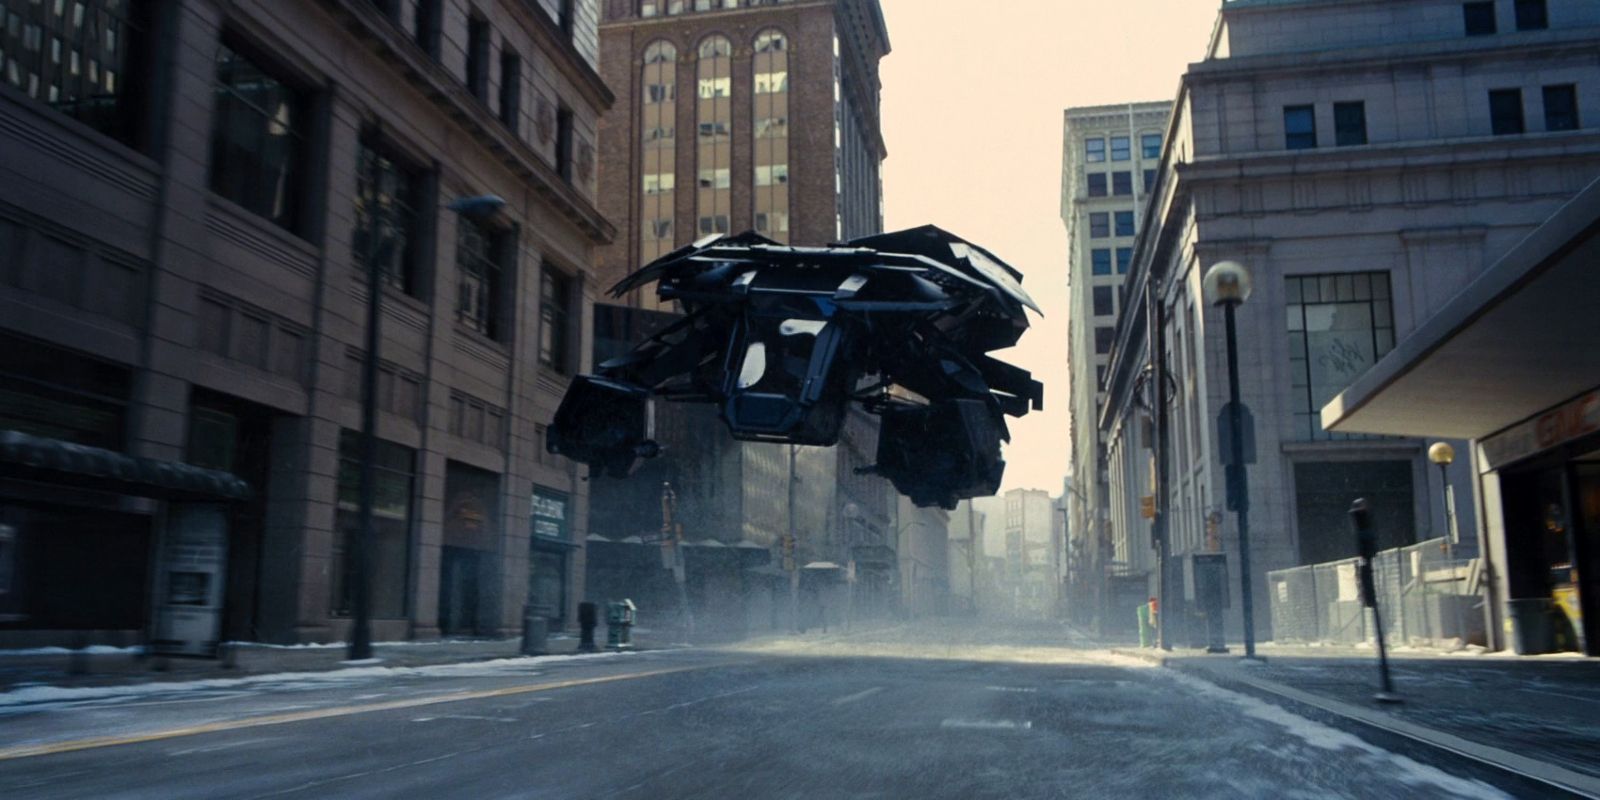 The Bat Hovering Through The Streets - The Dark Knight Rises